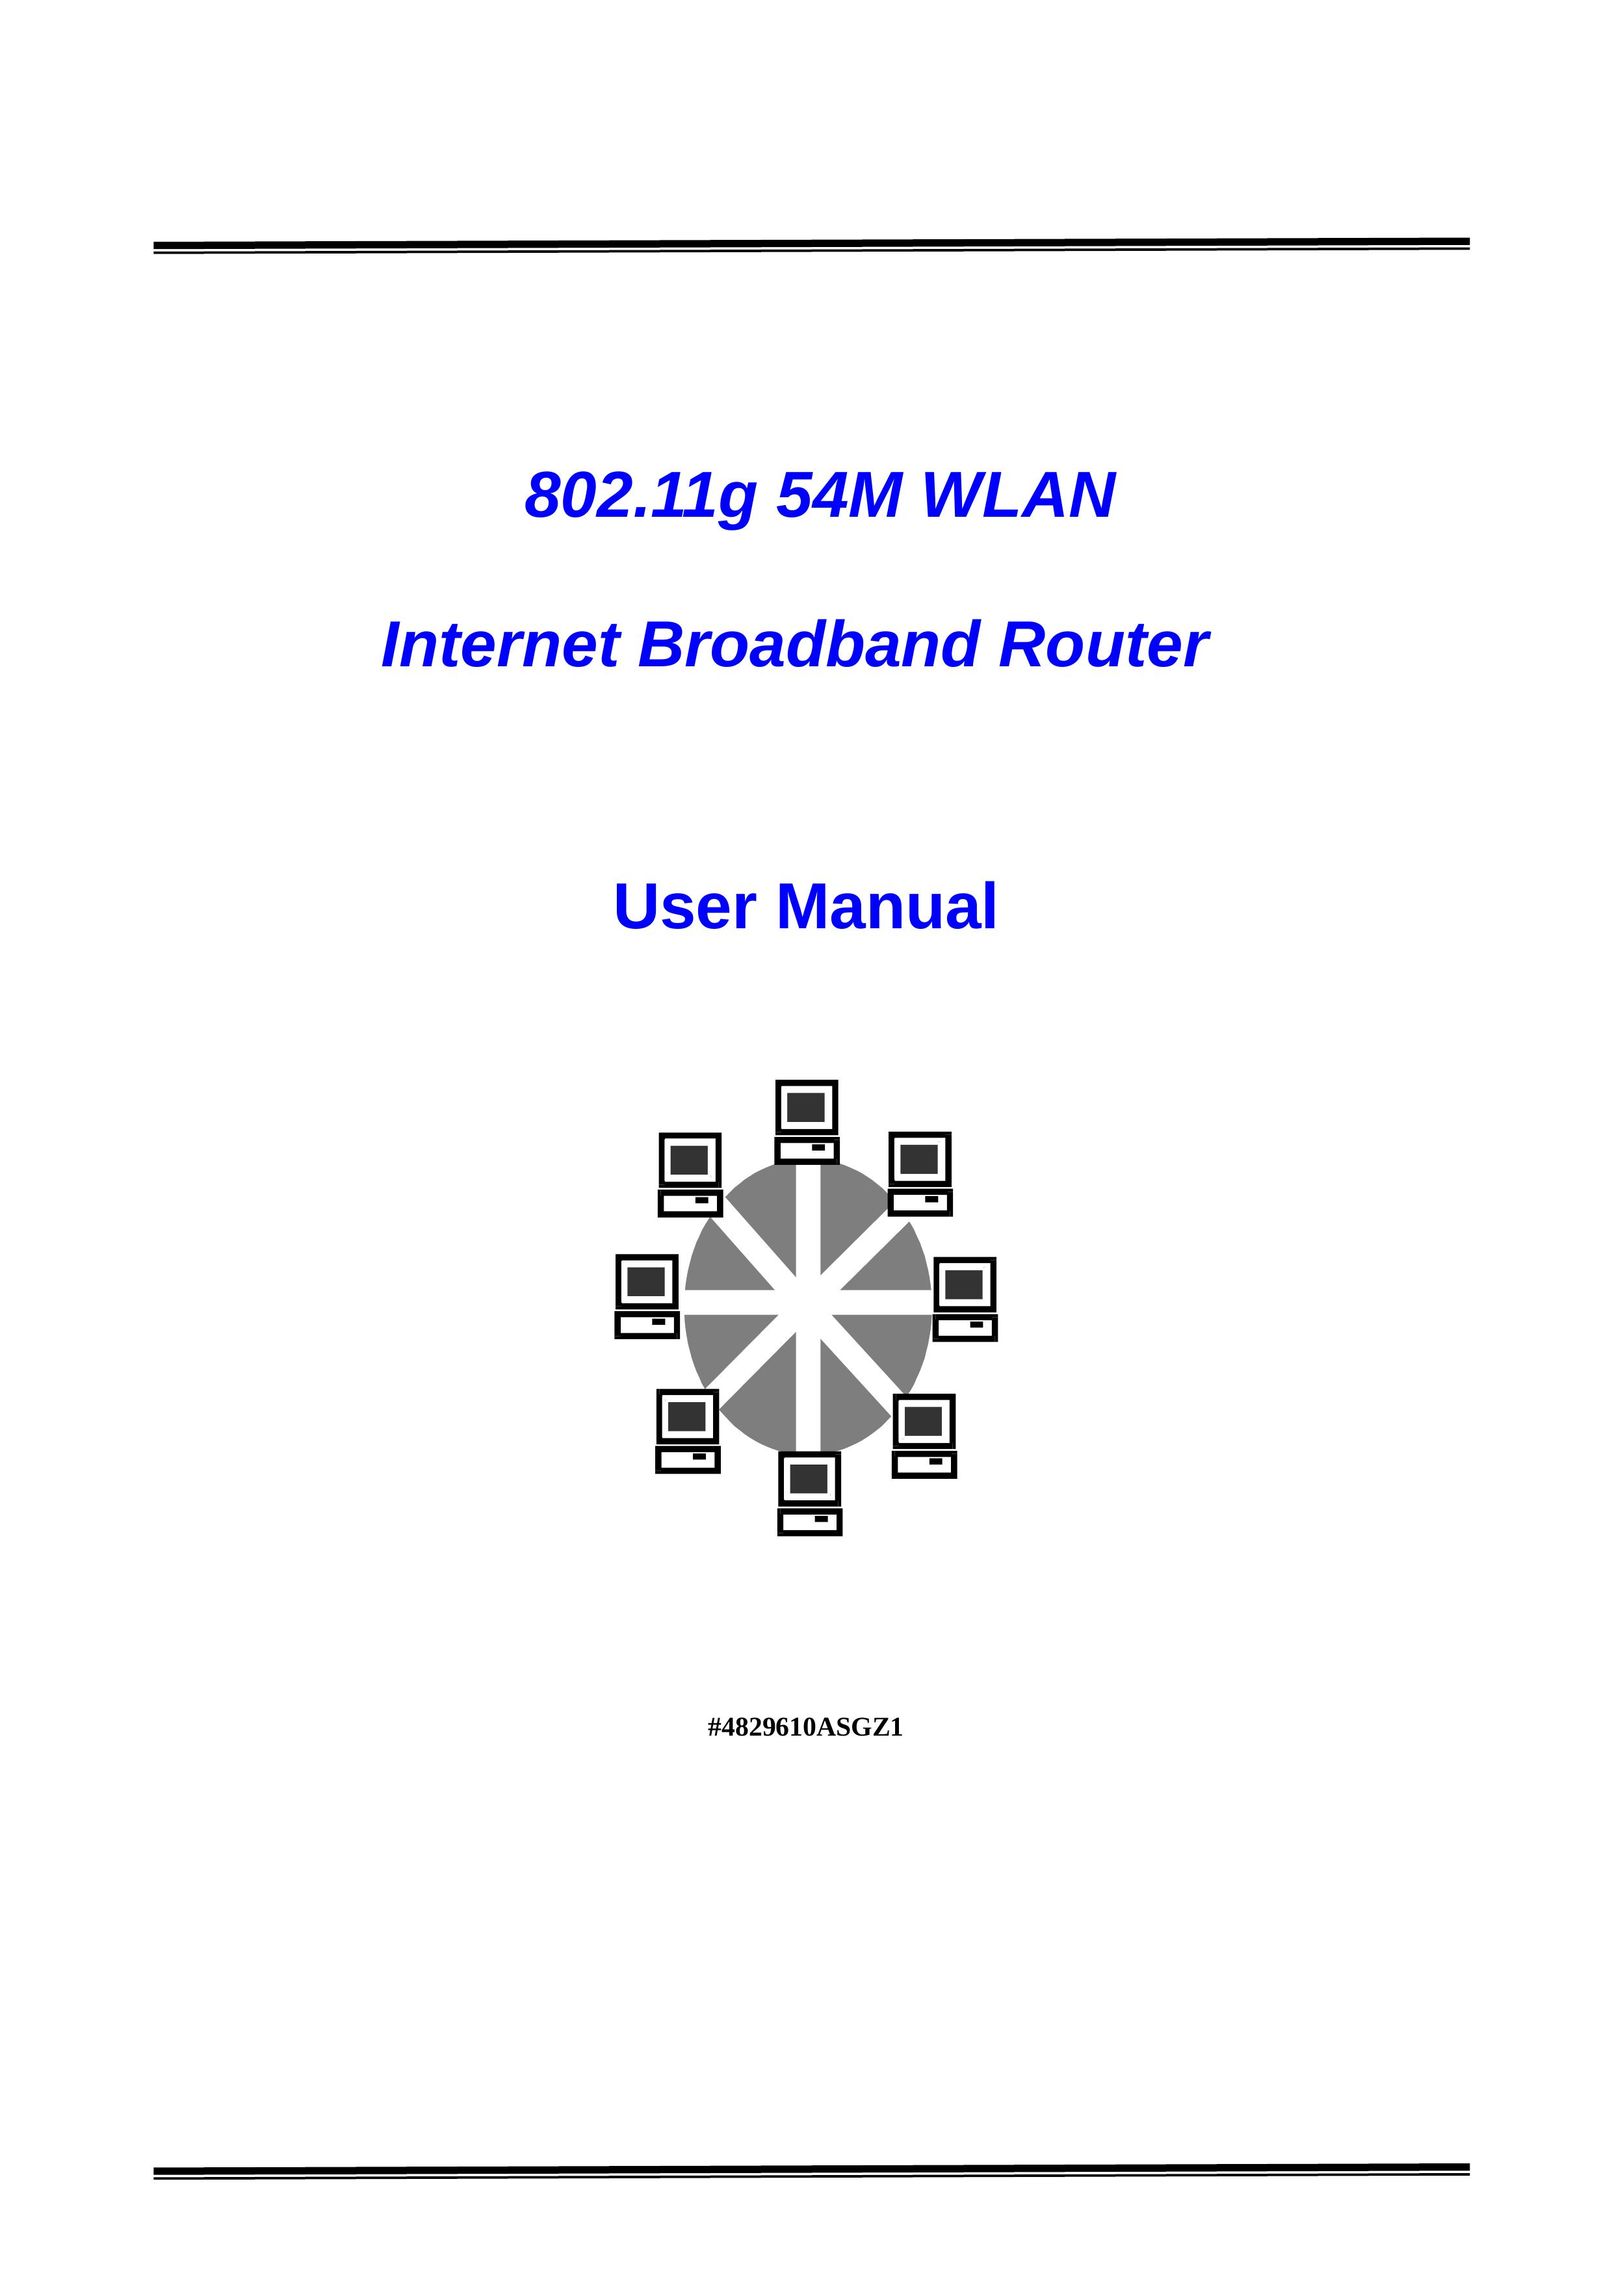 Canon 802.11g 54M WLAN Network Router User Manual